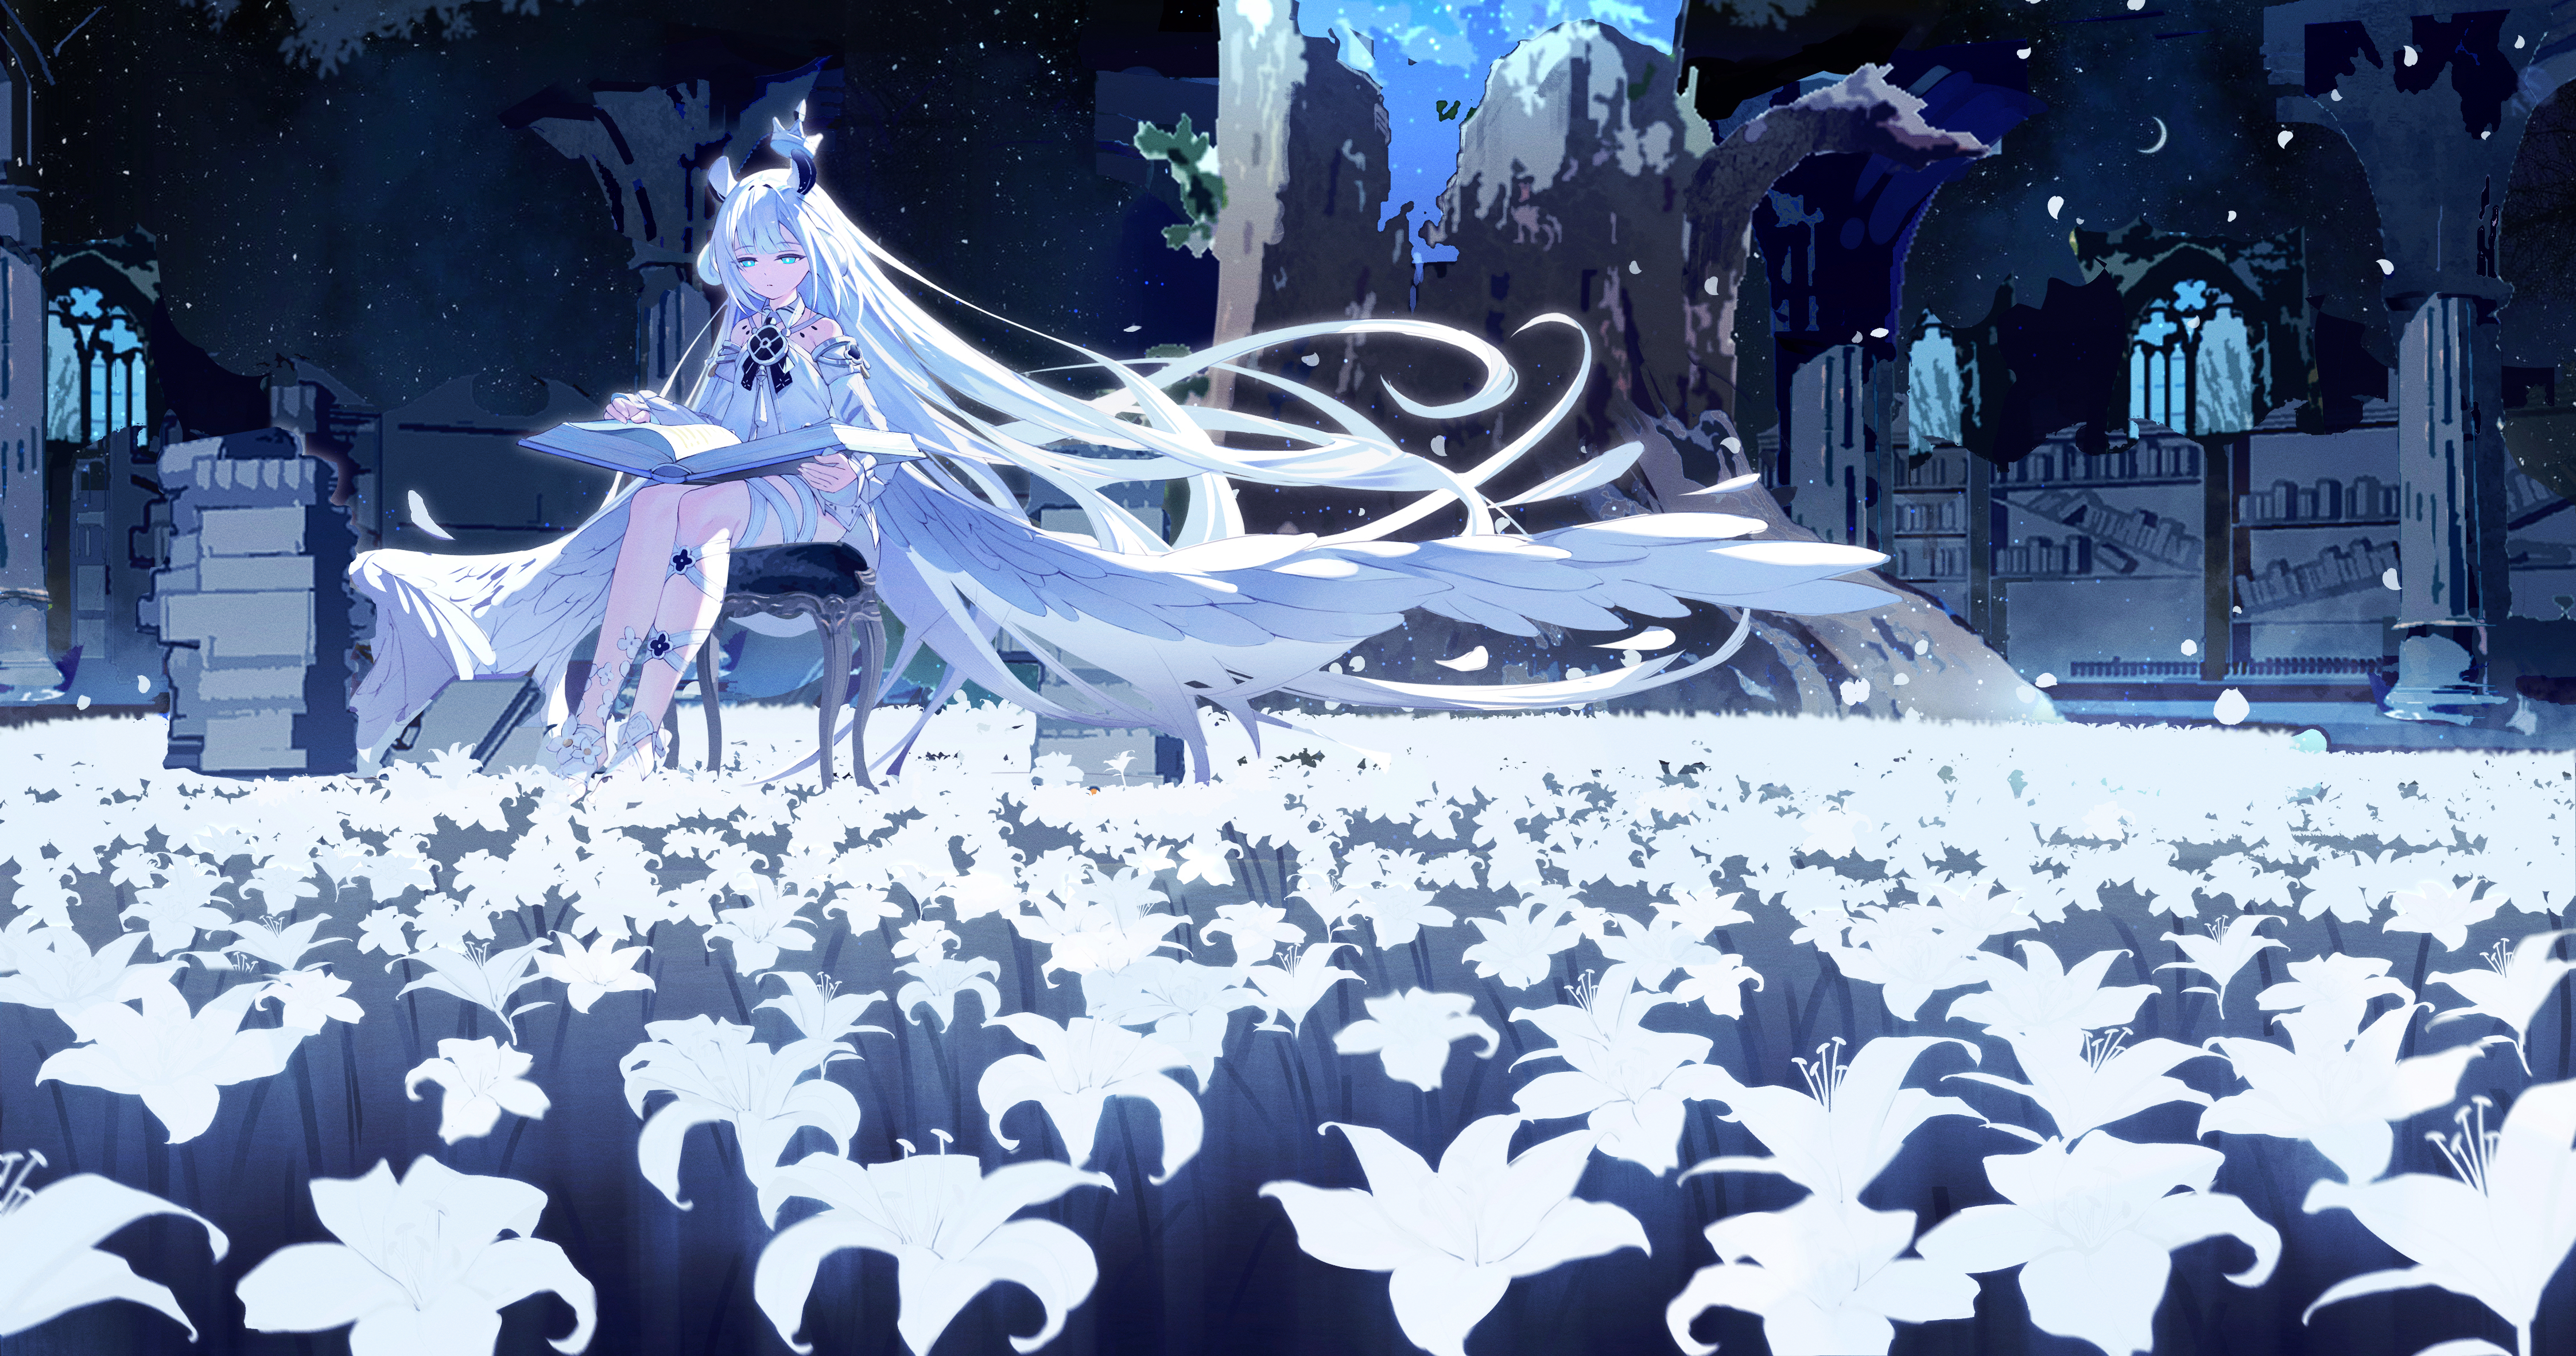 Anime 4488x2362 anime anime girls long hair flowers field crescent moon petals reading sitting blue eyes Wangman_435 chair blue hair white clothing hair blowing in the wind wind shelves books wings